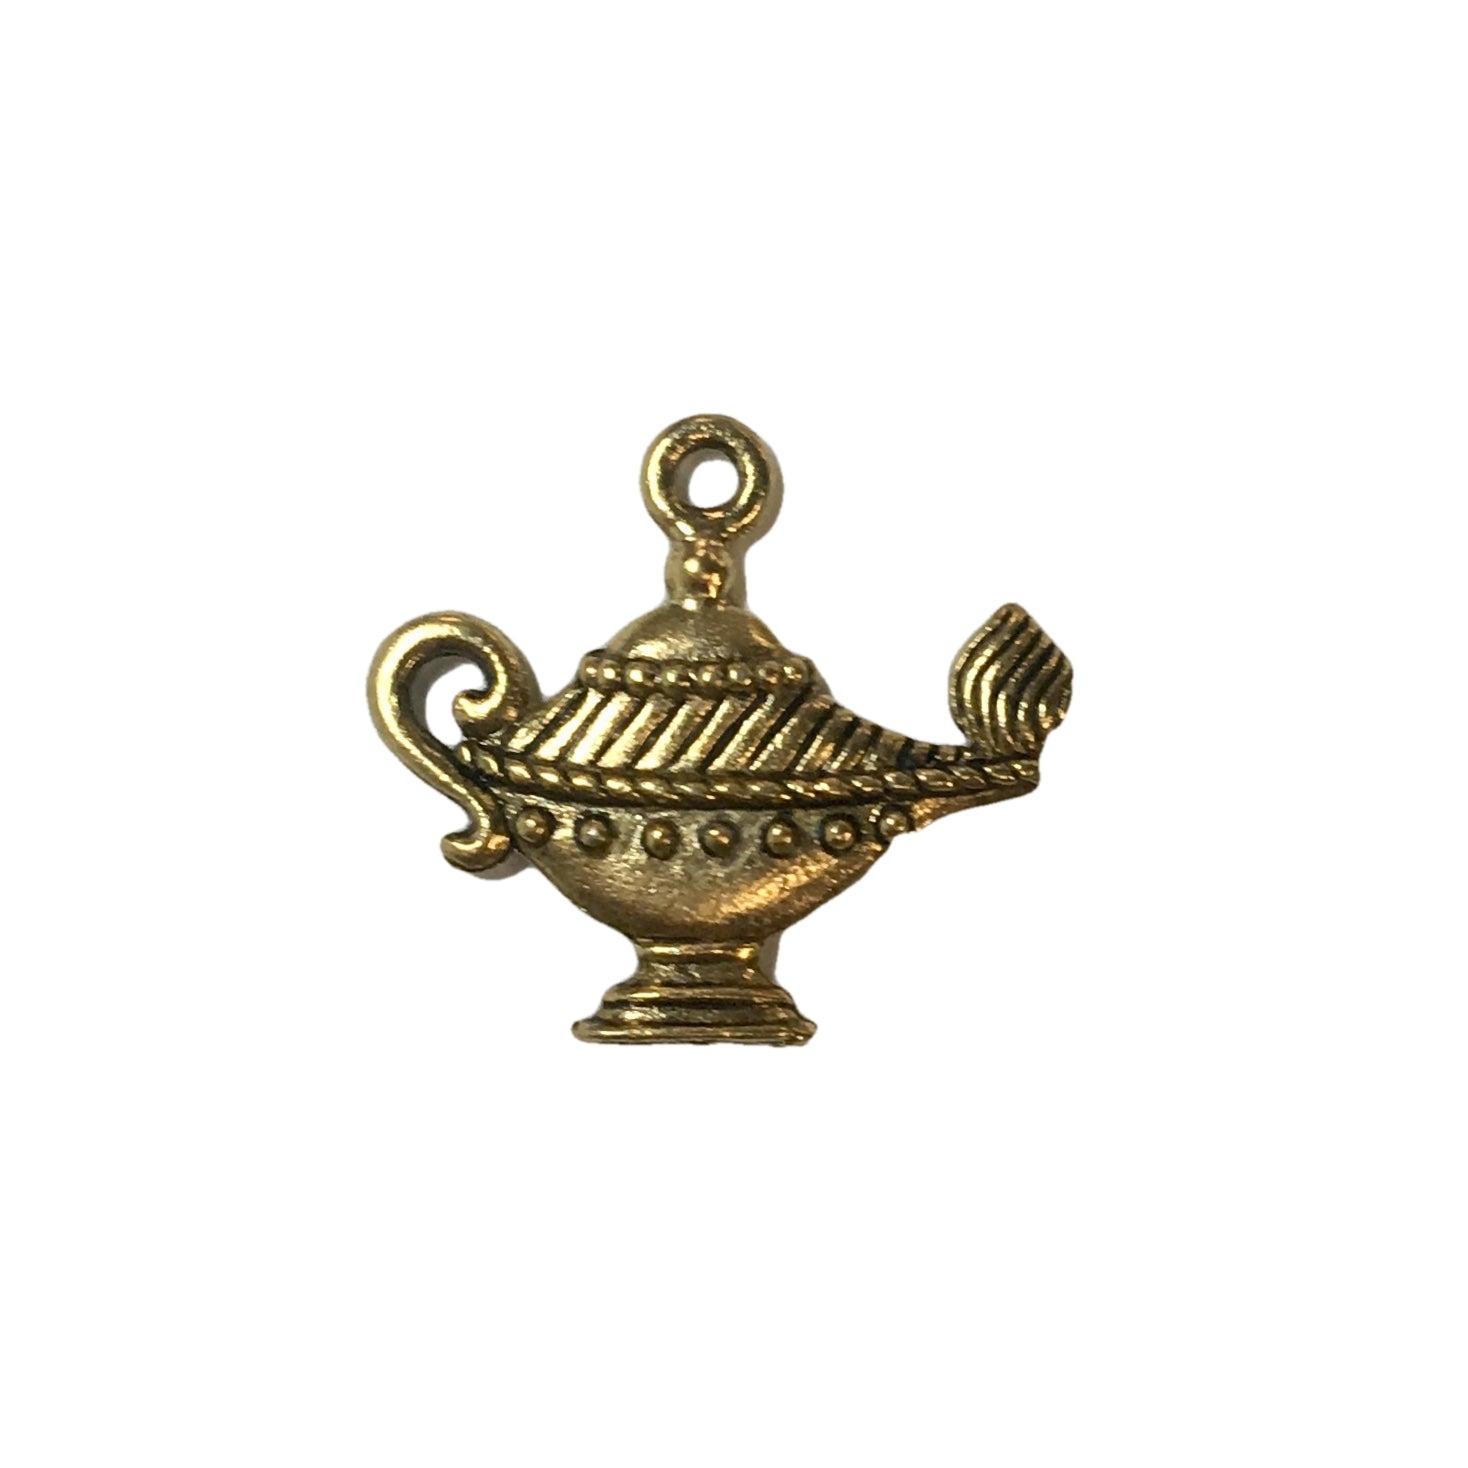 Genie's Magic Lamp Charms - Qty of 5 Charms - 24kt Gold Plated Lead Free Pewter - American Made